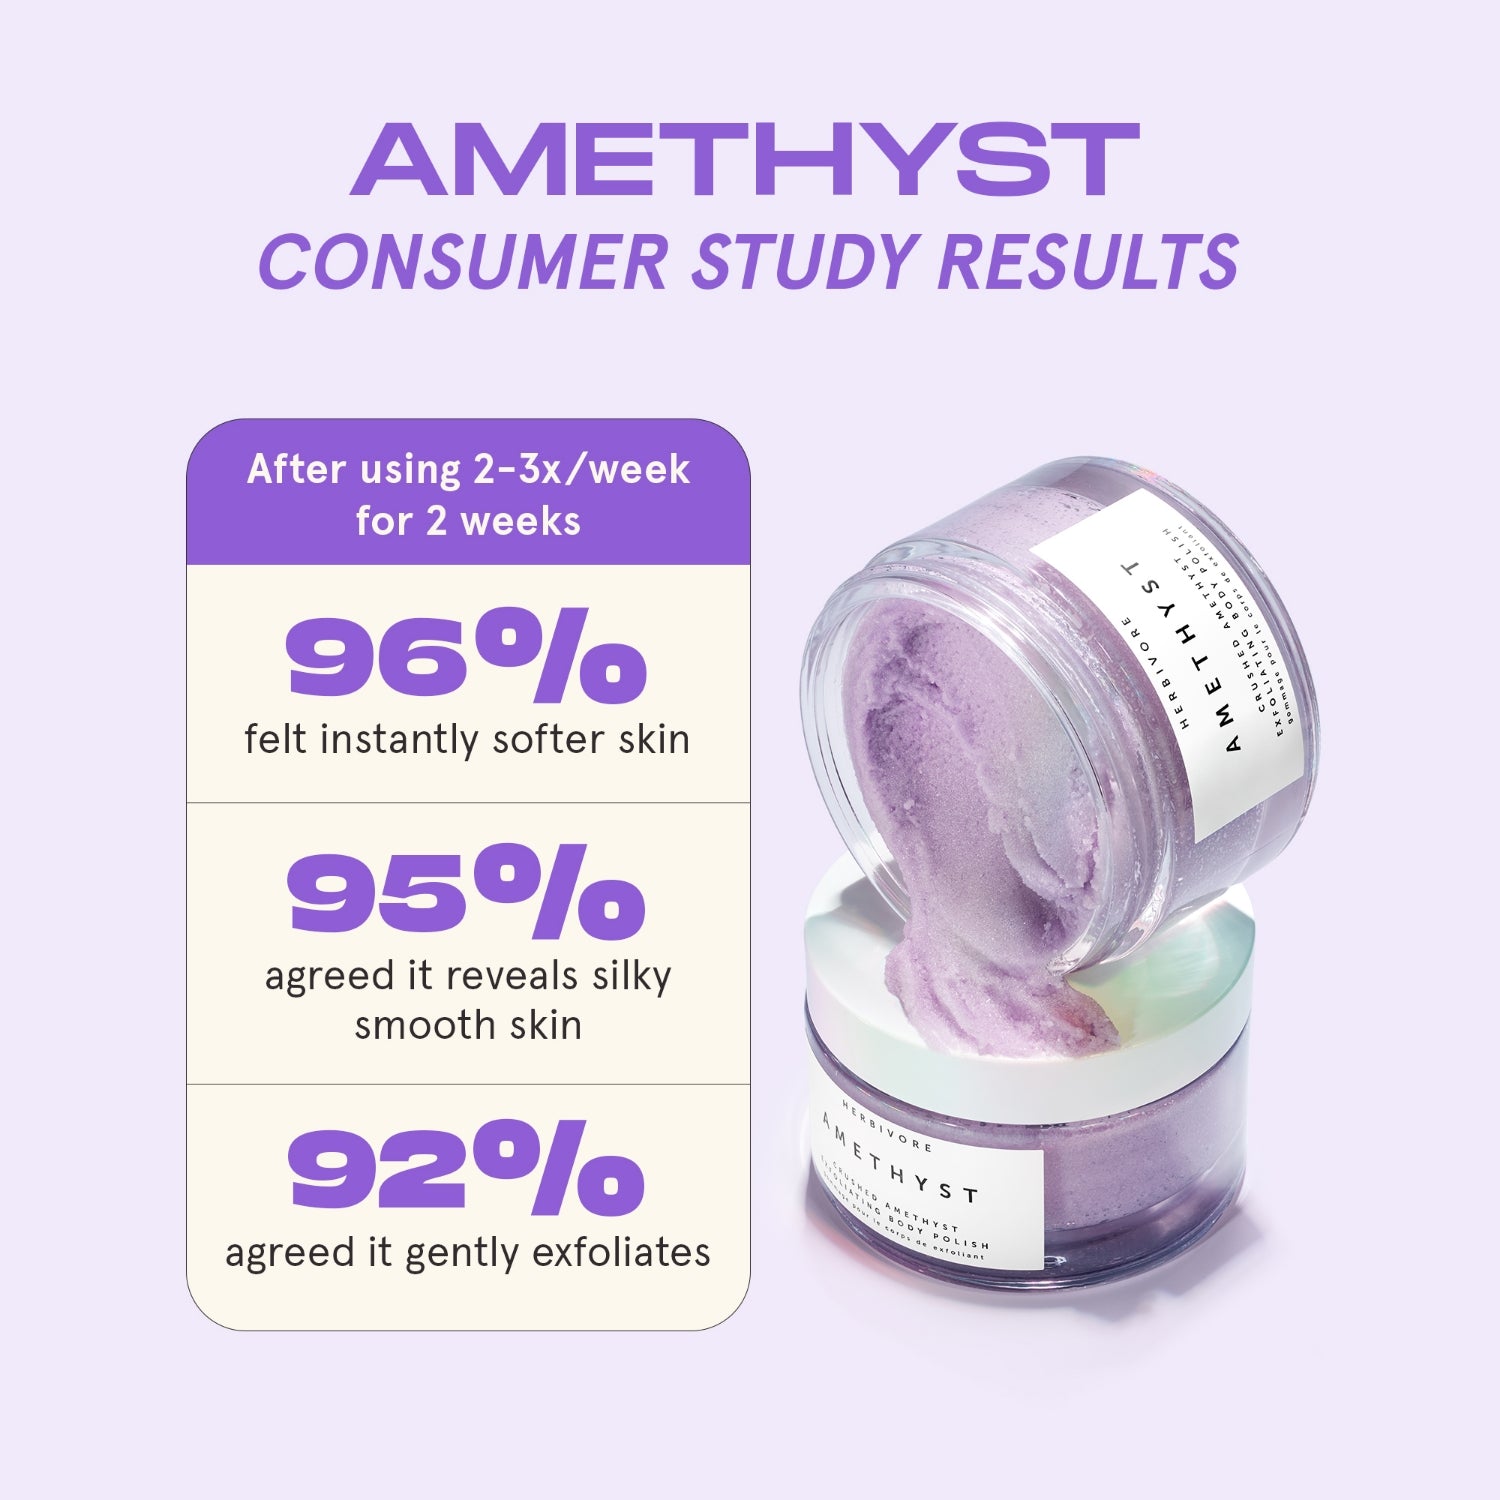 Amethyst Body Scrub consumer study results after 2 wks of use